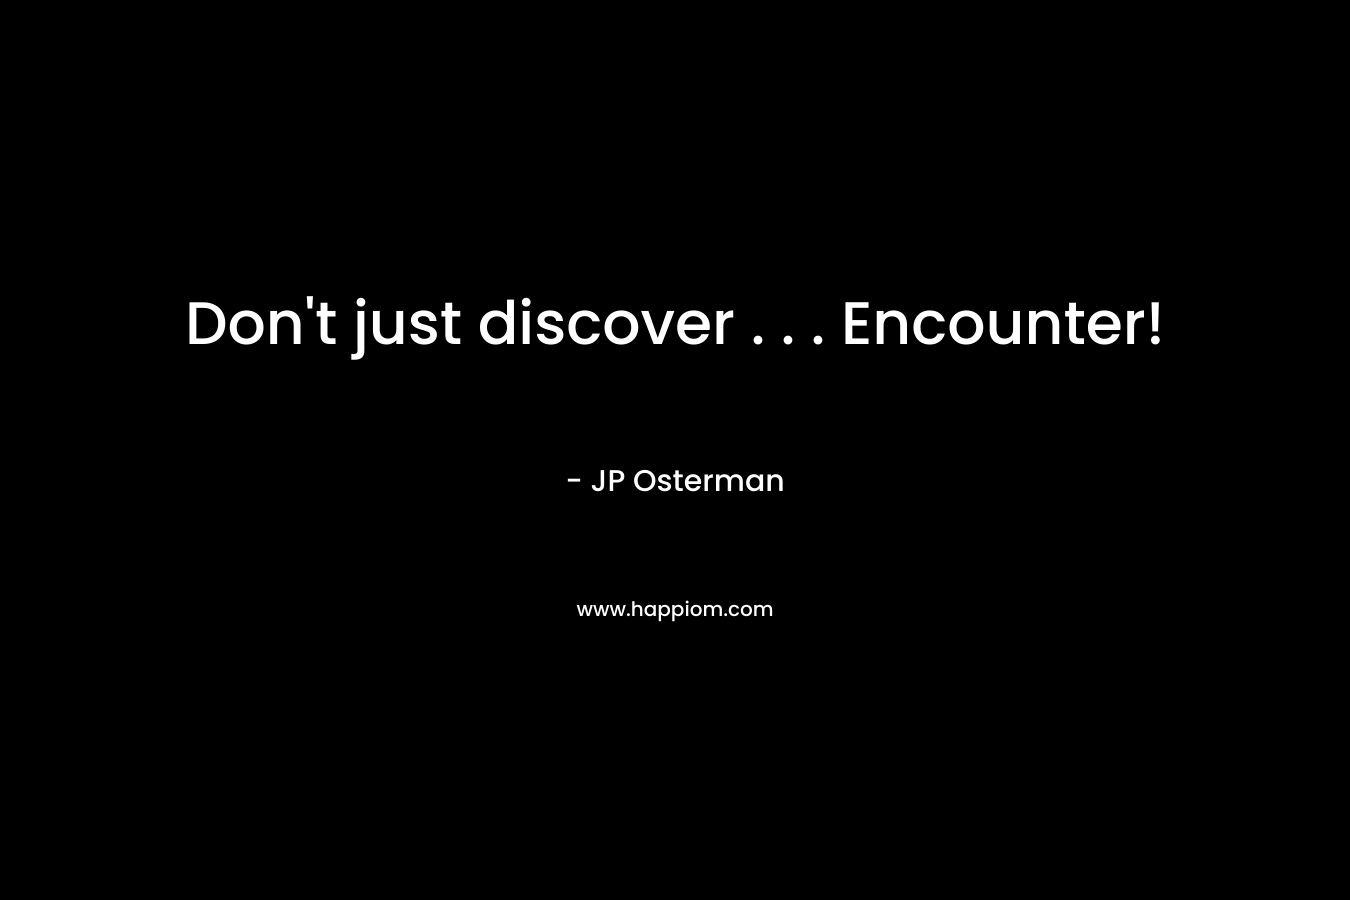 Don't just discover . . . Encounter!